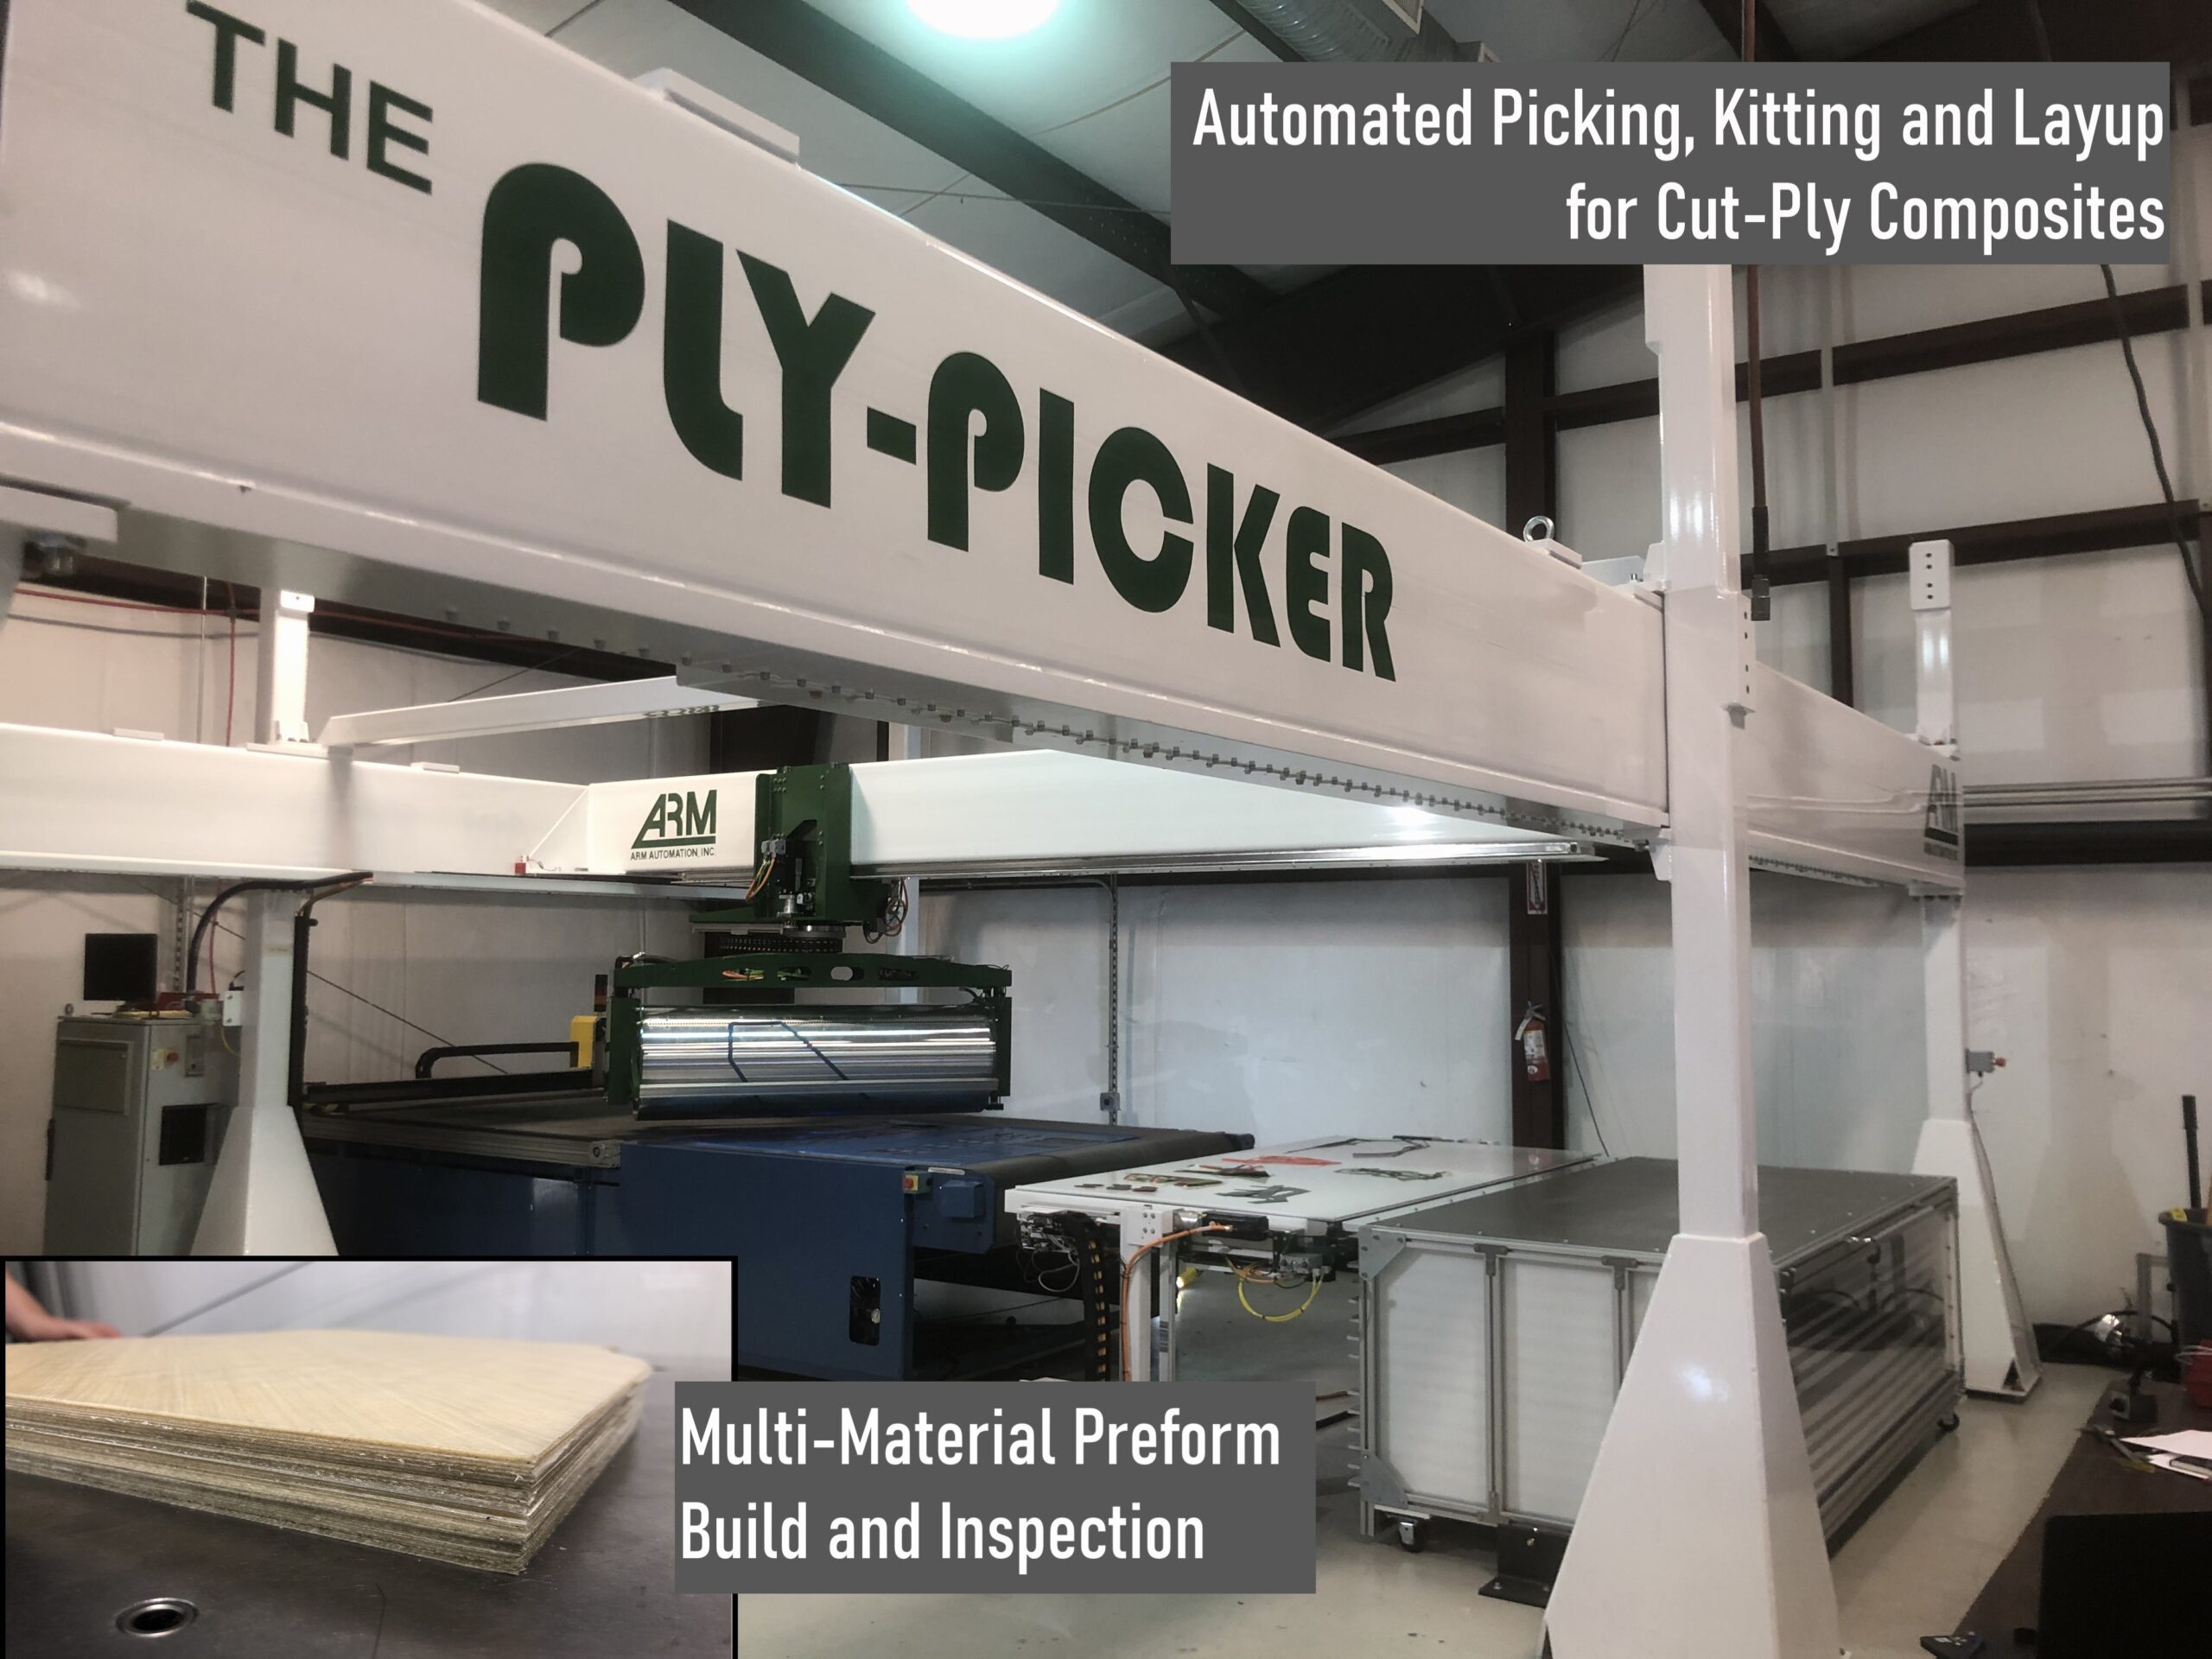 The Ply Picker